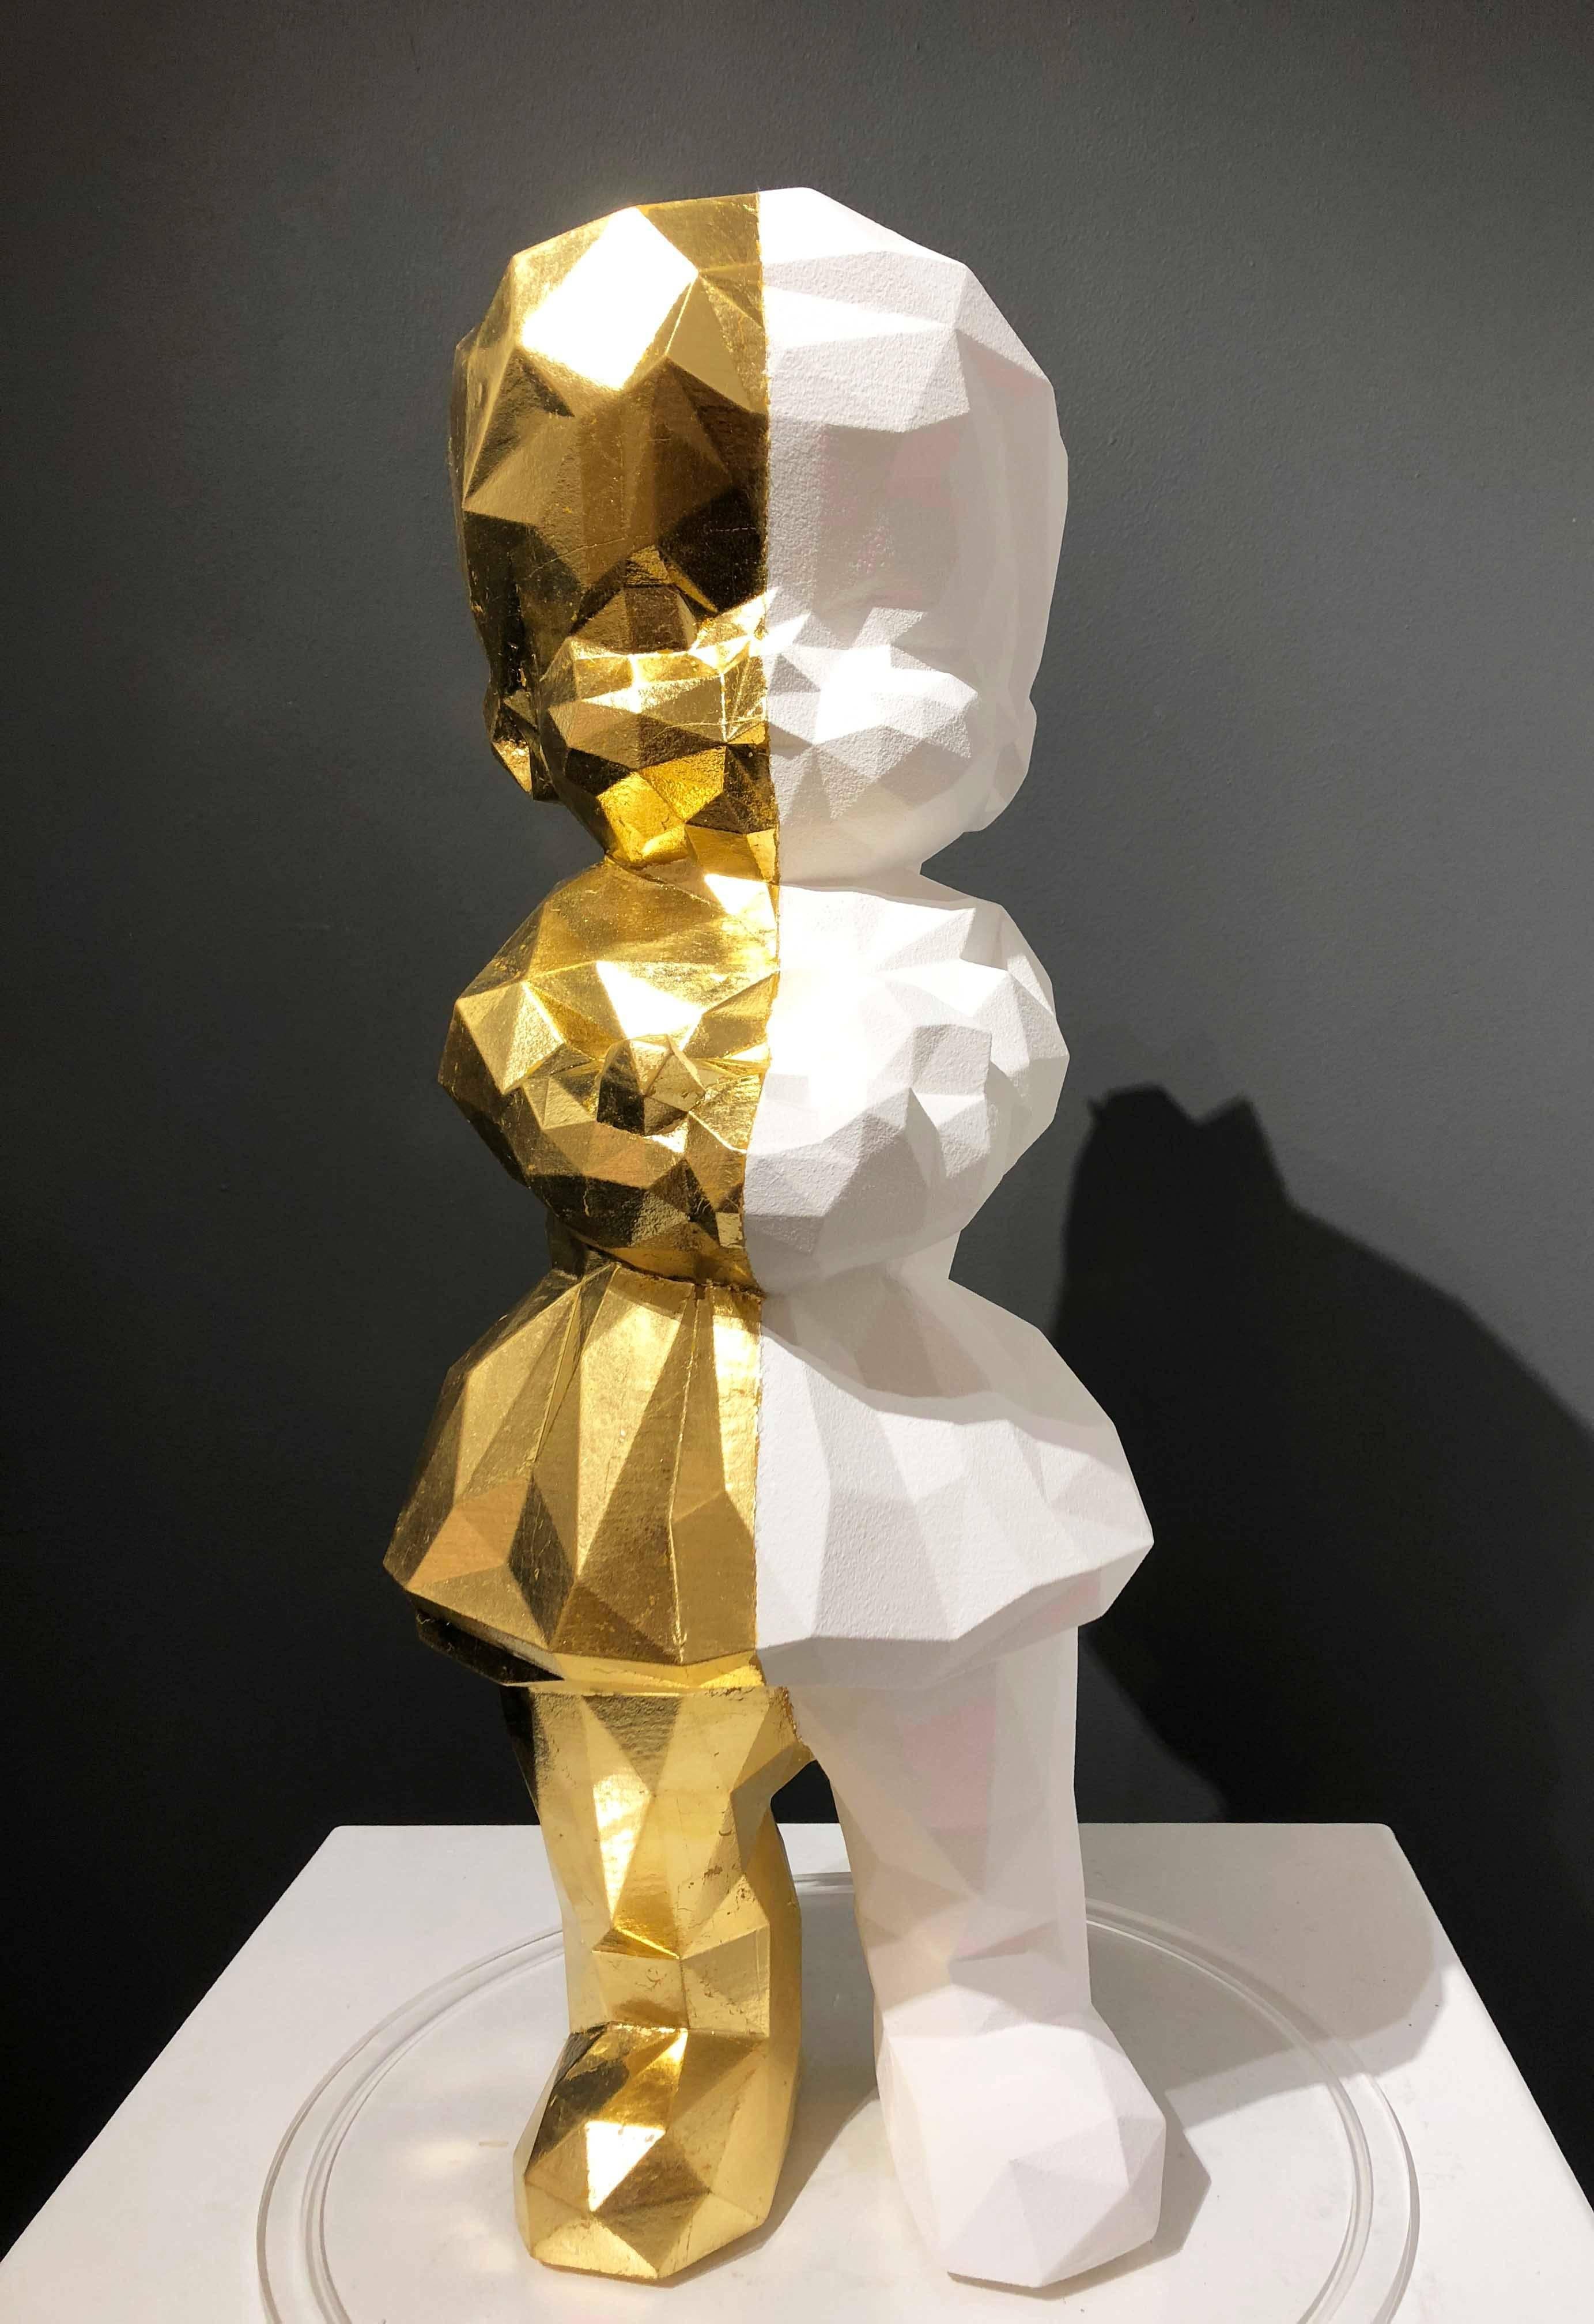 Lost Toy Girl - Gold Figurative Sculpture by Mo Cornelisse